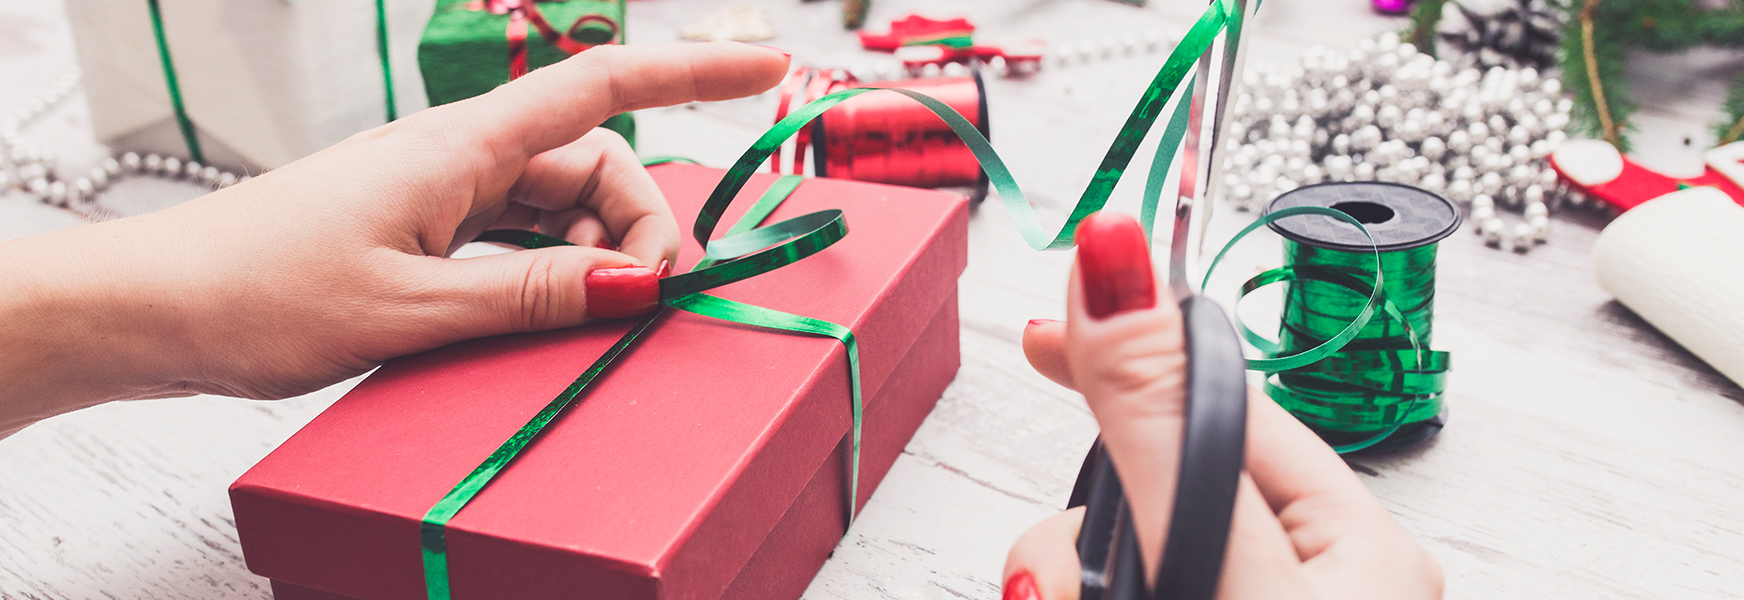 6 Great Gift Wrapping Tips, As Told by a Pro